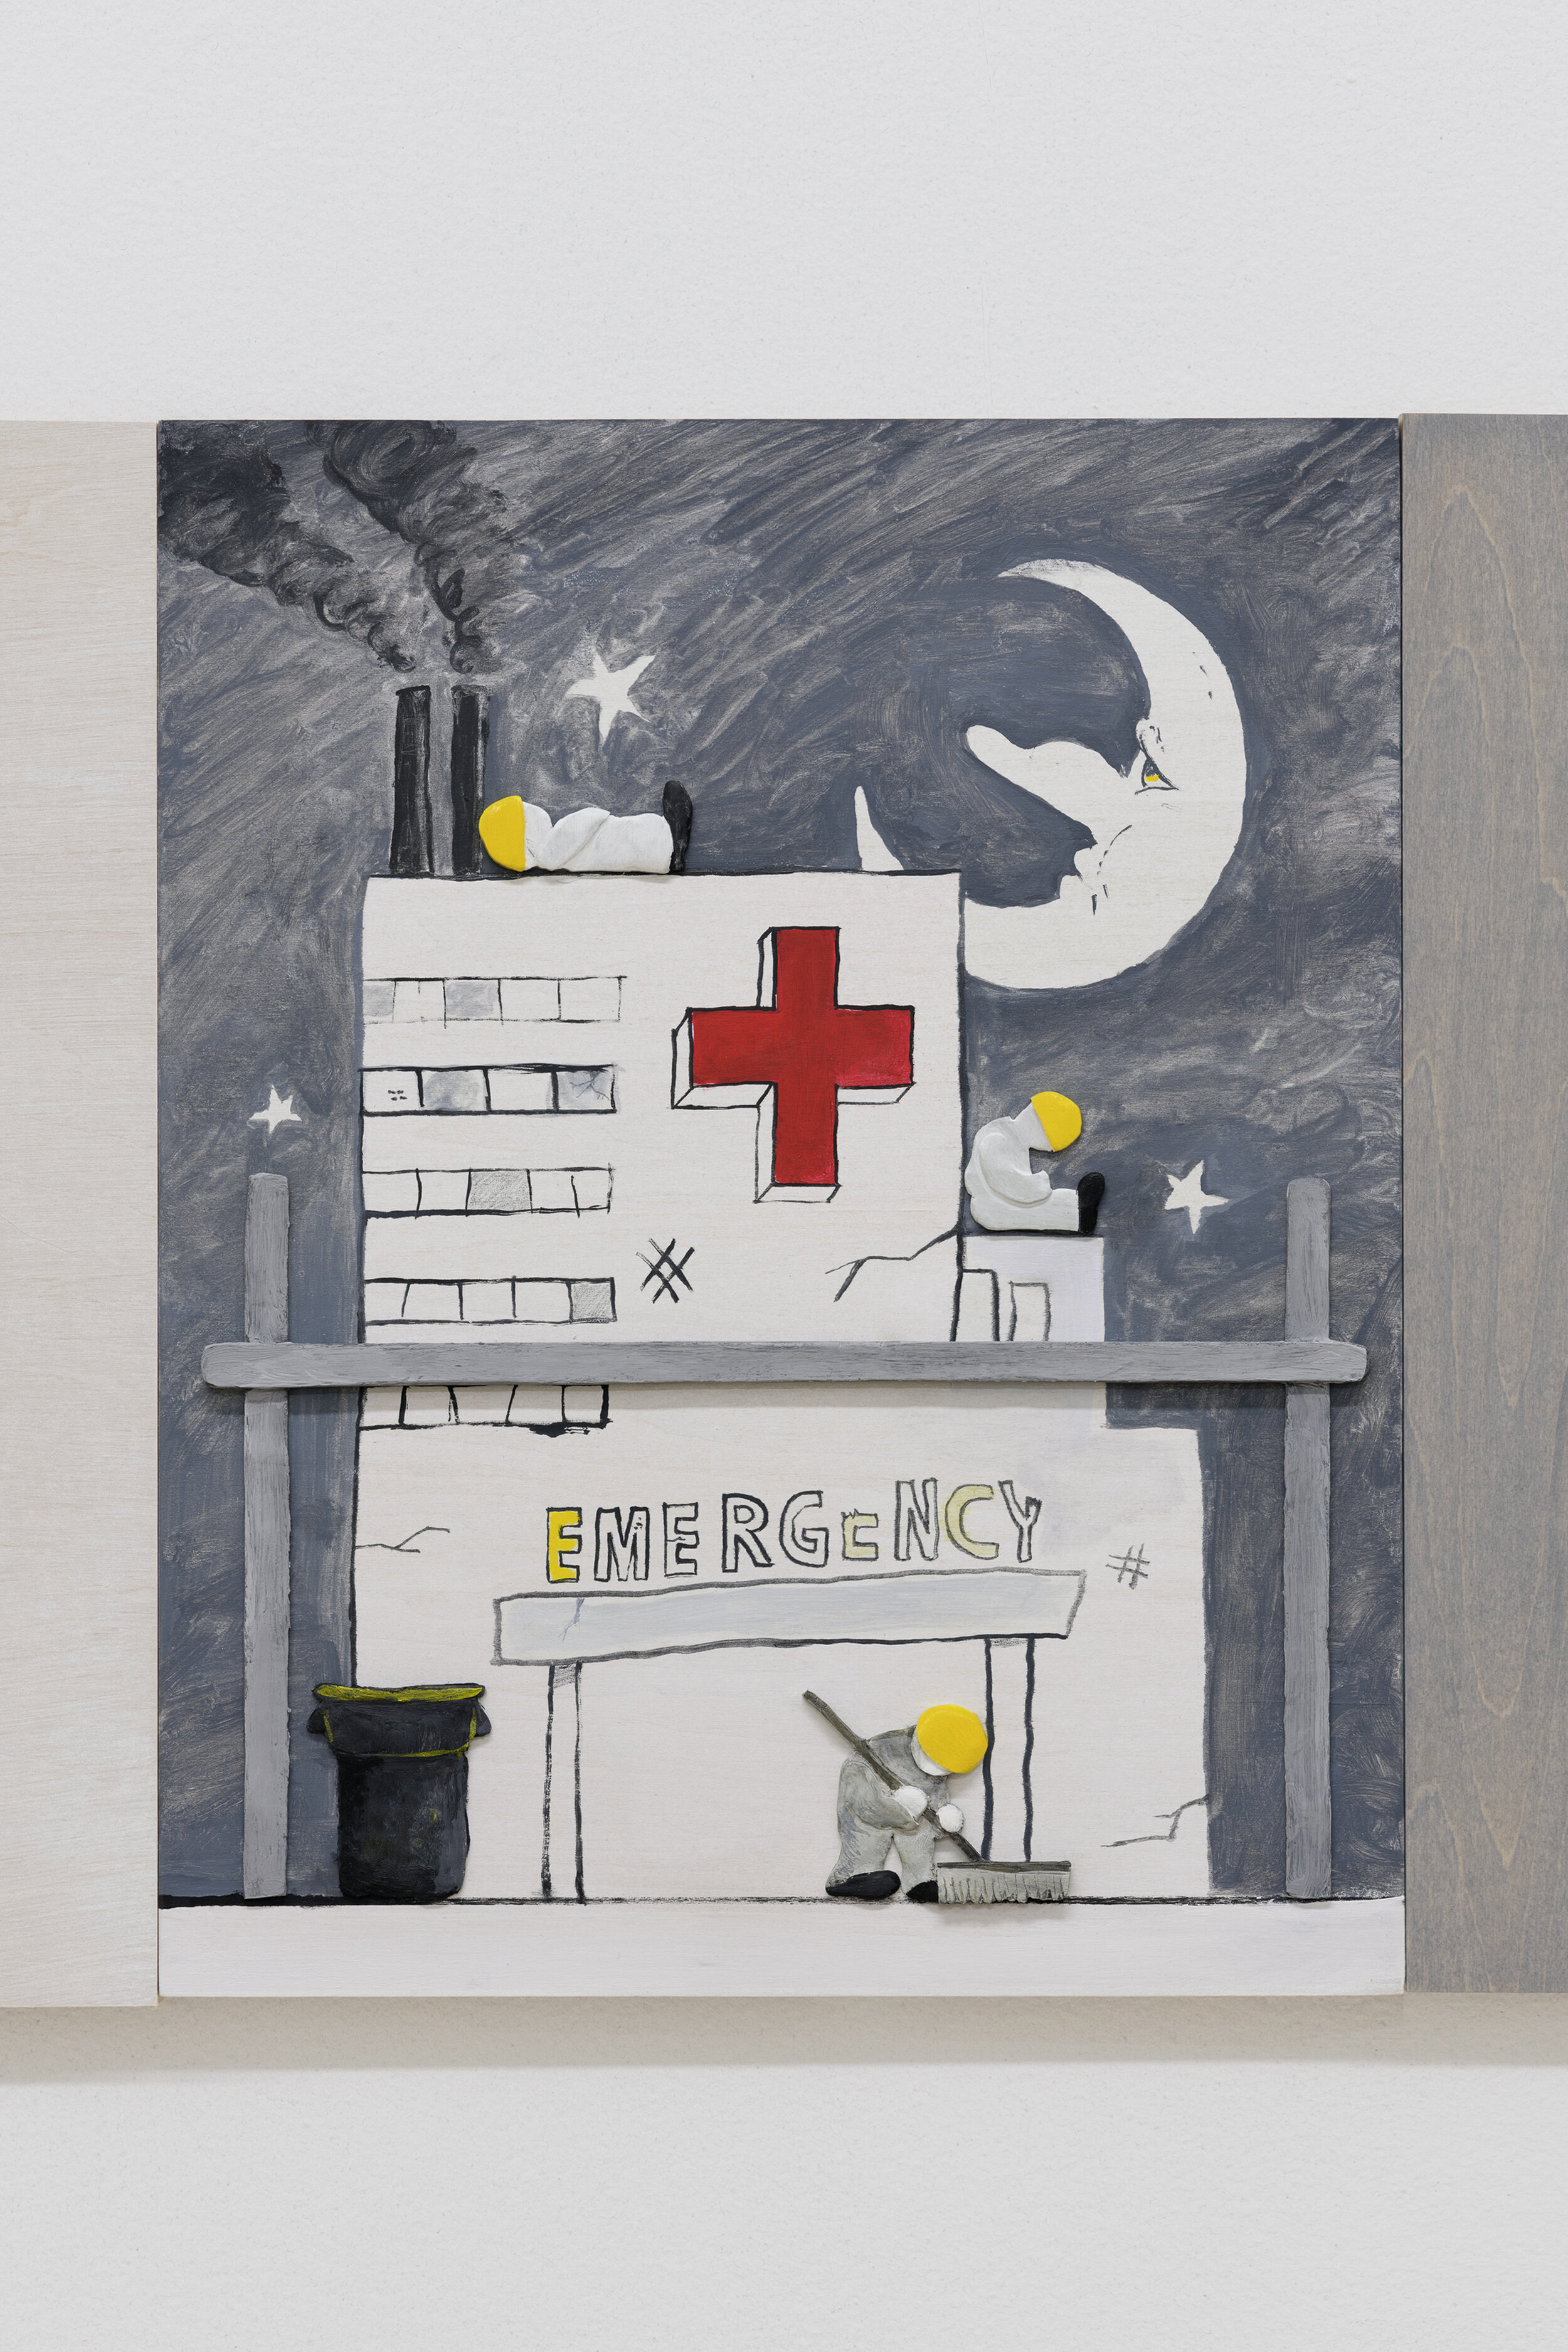  Dennis Witkin  Repairing Hospital,  2020 Oil paint, acrylic paint, cal-tint, wood-stain, charcoal, graphite, epoxy clay, polymer clay on panel 14 x 11 inches 